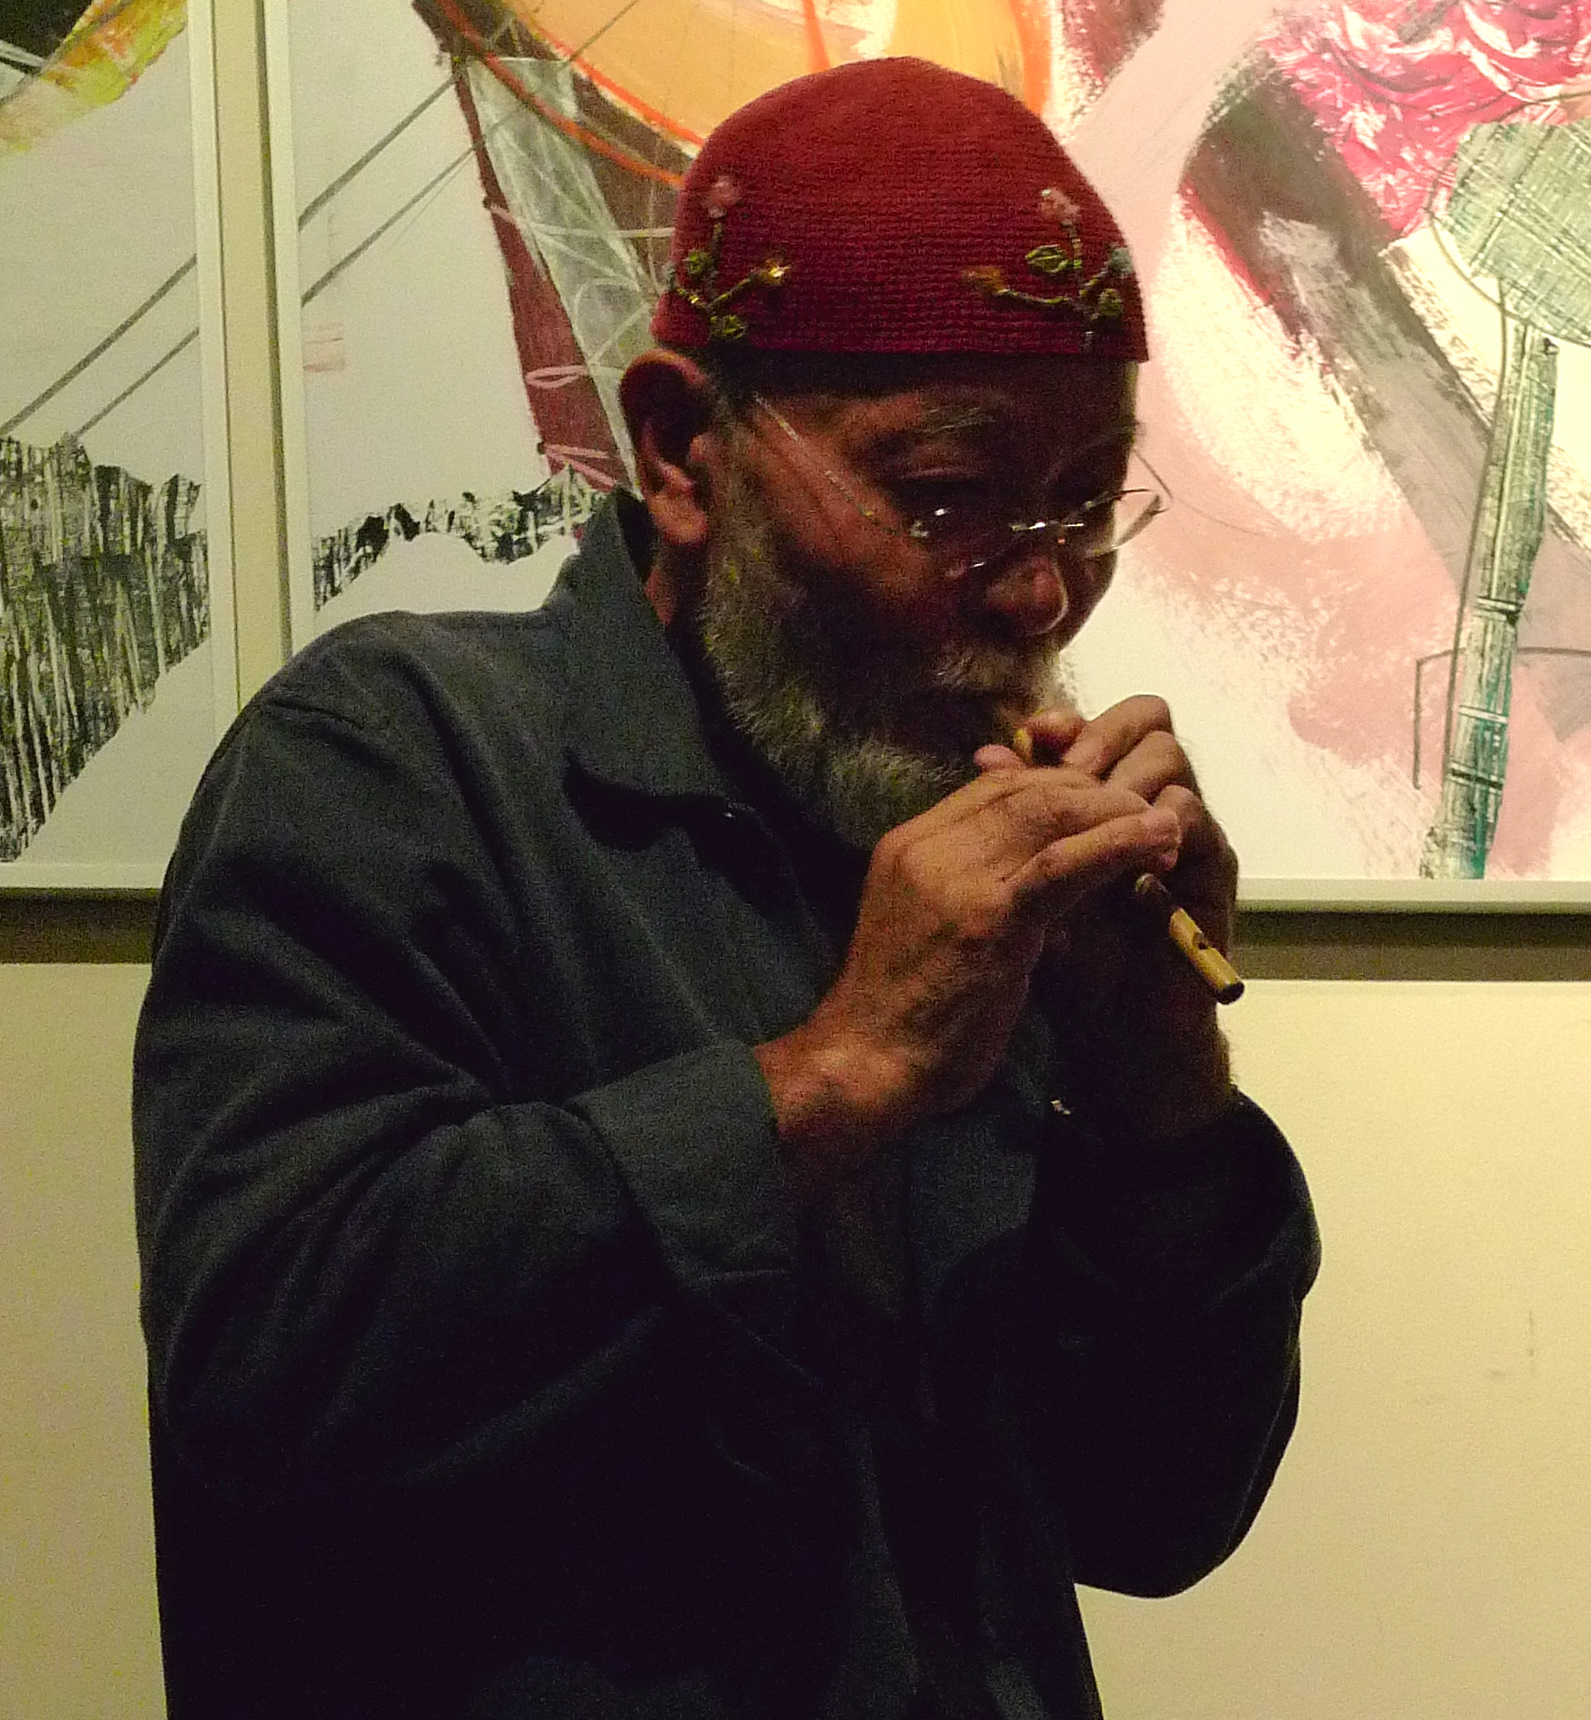 a man in a red hat and glasses playing with a trumpet